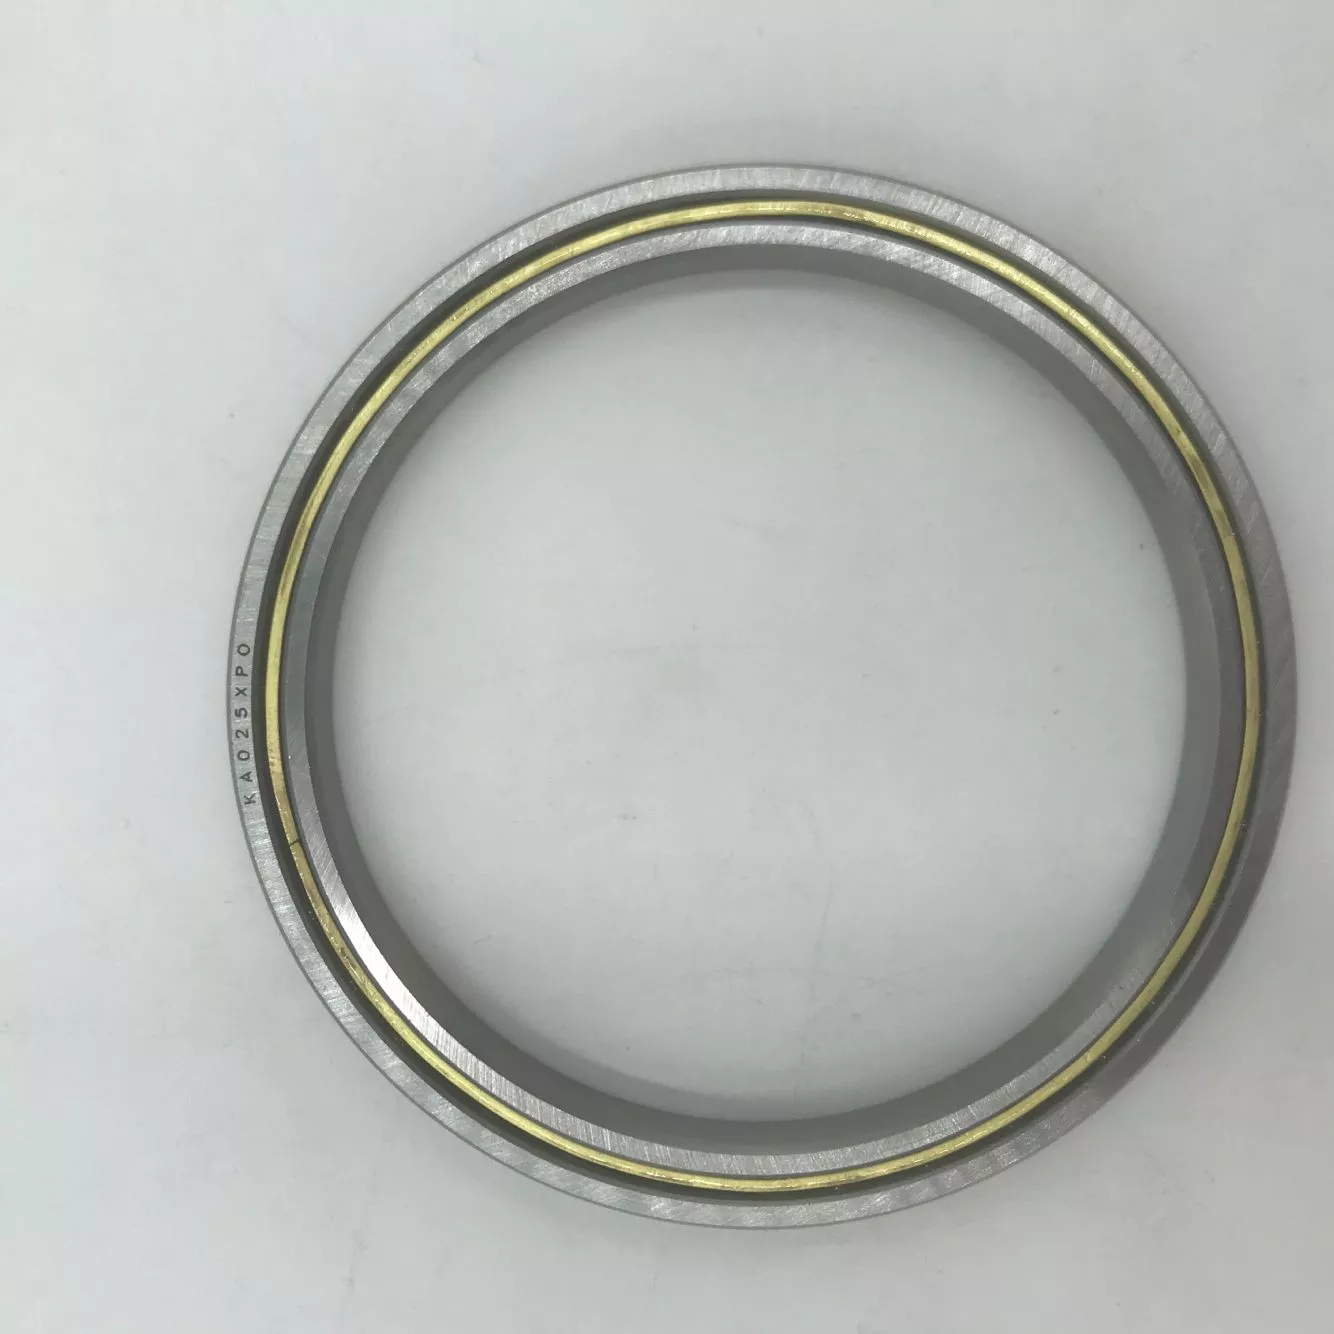 Waxing blowout preventers buy angular contact bearings low friction wholesale-2